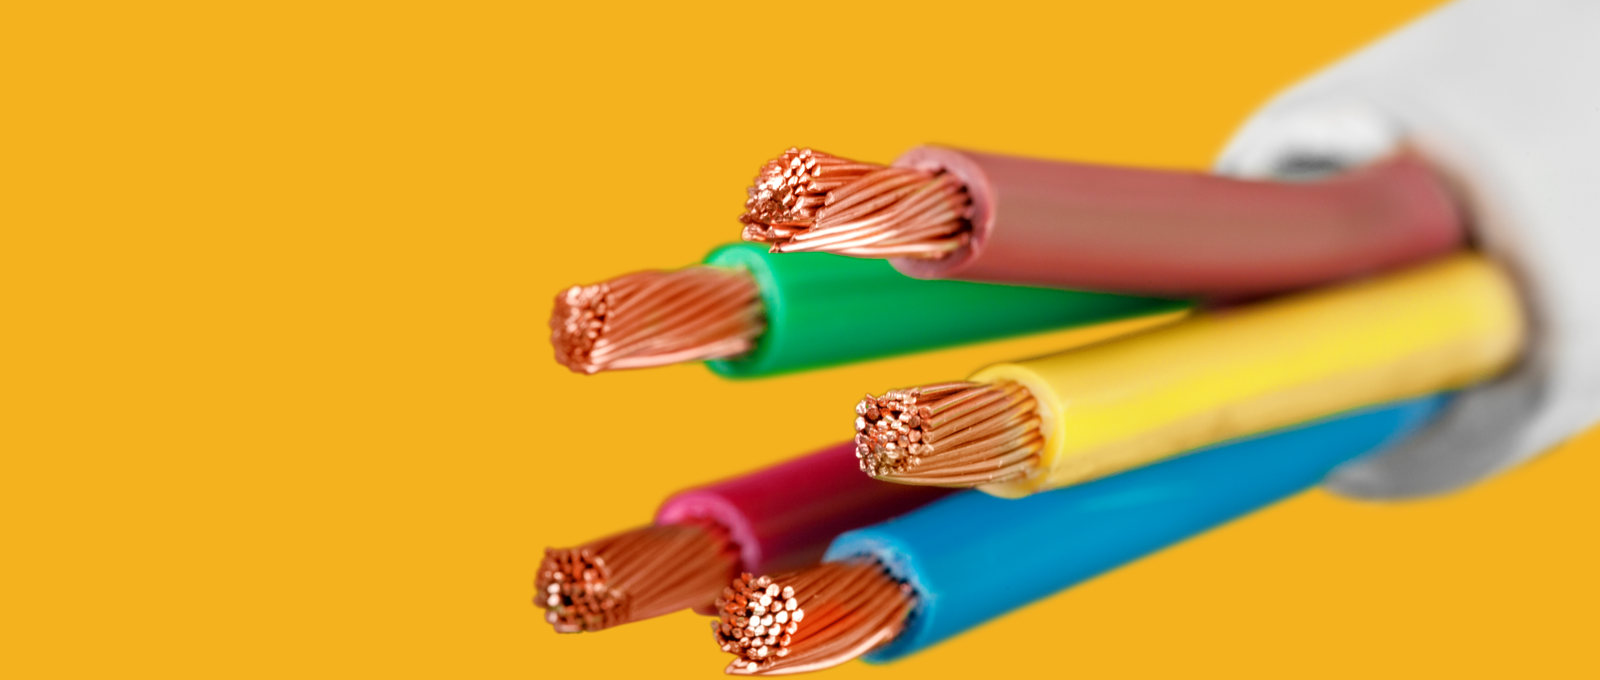 Close up of multiple exposed internal copper wires of an electrical cable